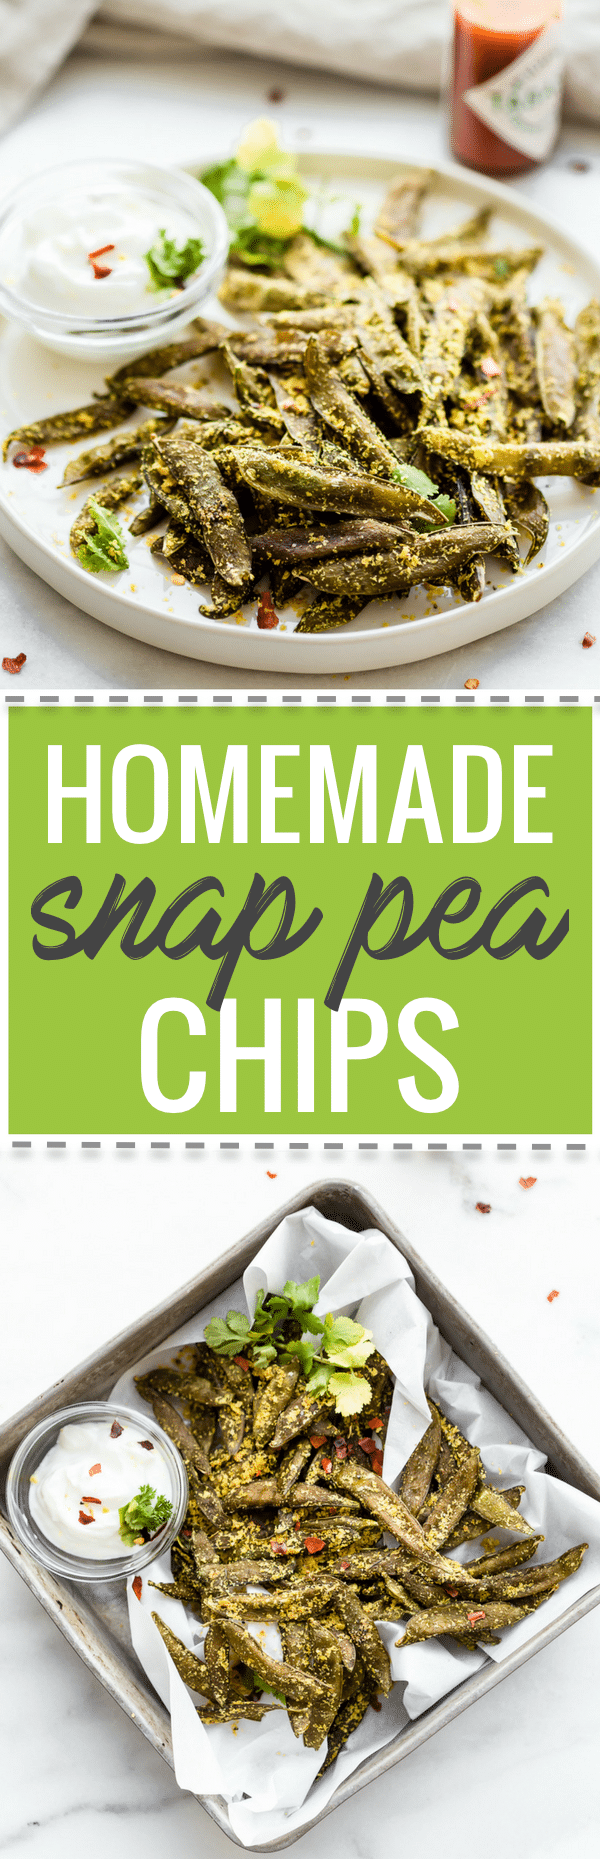 How to Make Homemade Snap Pea Chips in the oven or dehydrator! Have you ever wanted to make your own snap pea chips and save on money? Well, it’s quite an easy recipe. Just season to your liking and pop in the oven or dehydrator. All it’s takes is 3 ingredients! A Vegan, Paleo, and budget friendly snap pea chips recipe. www.cottercrunch.com